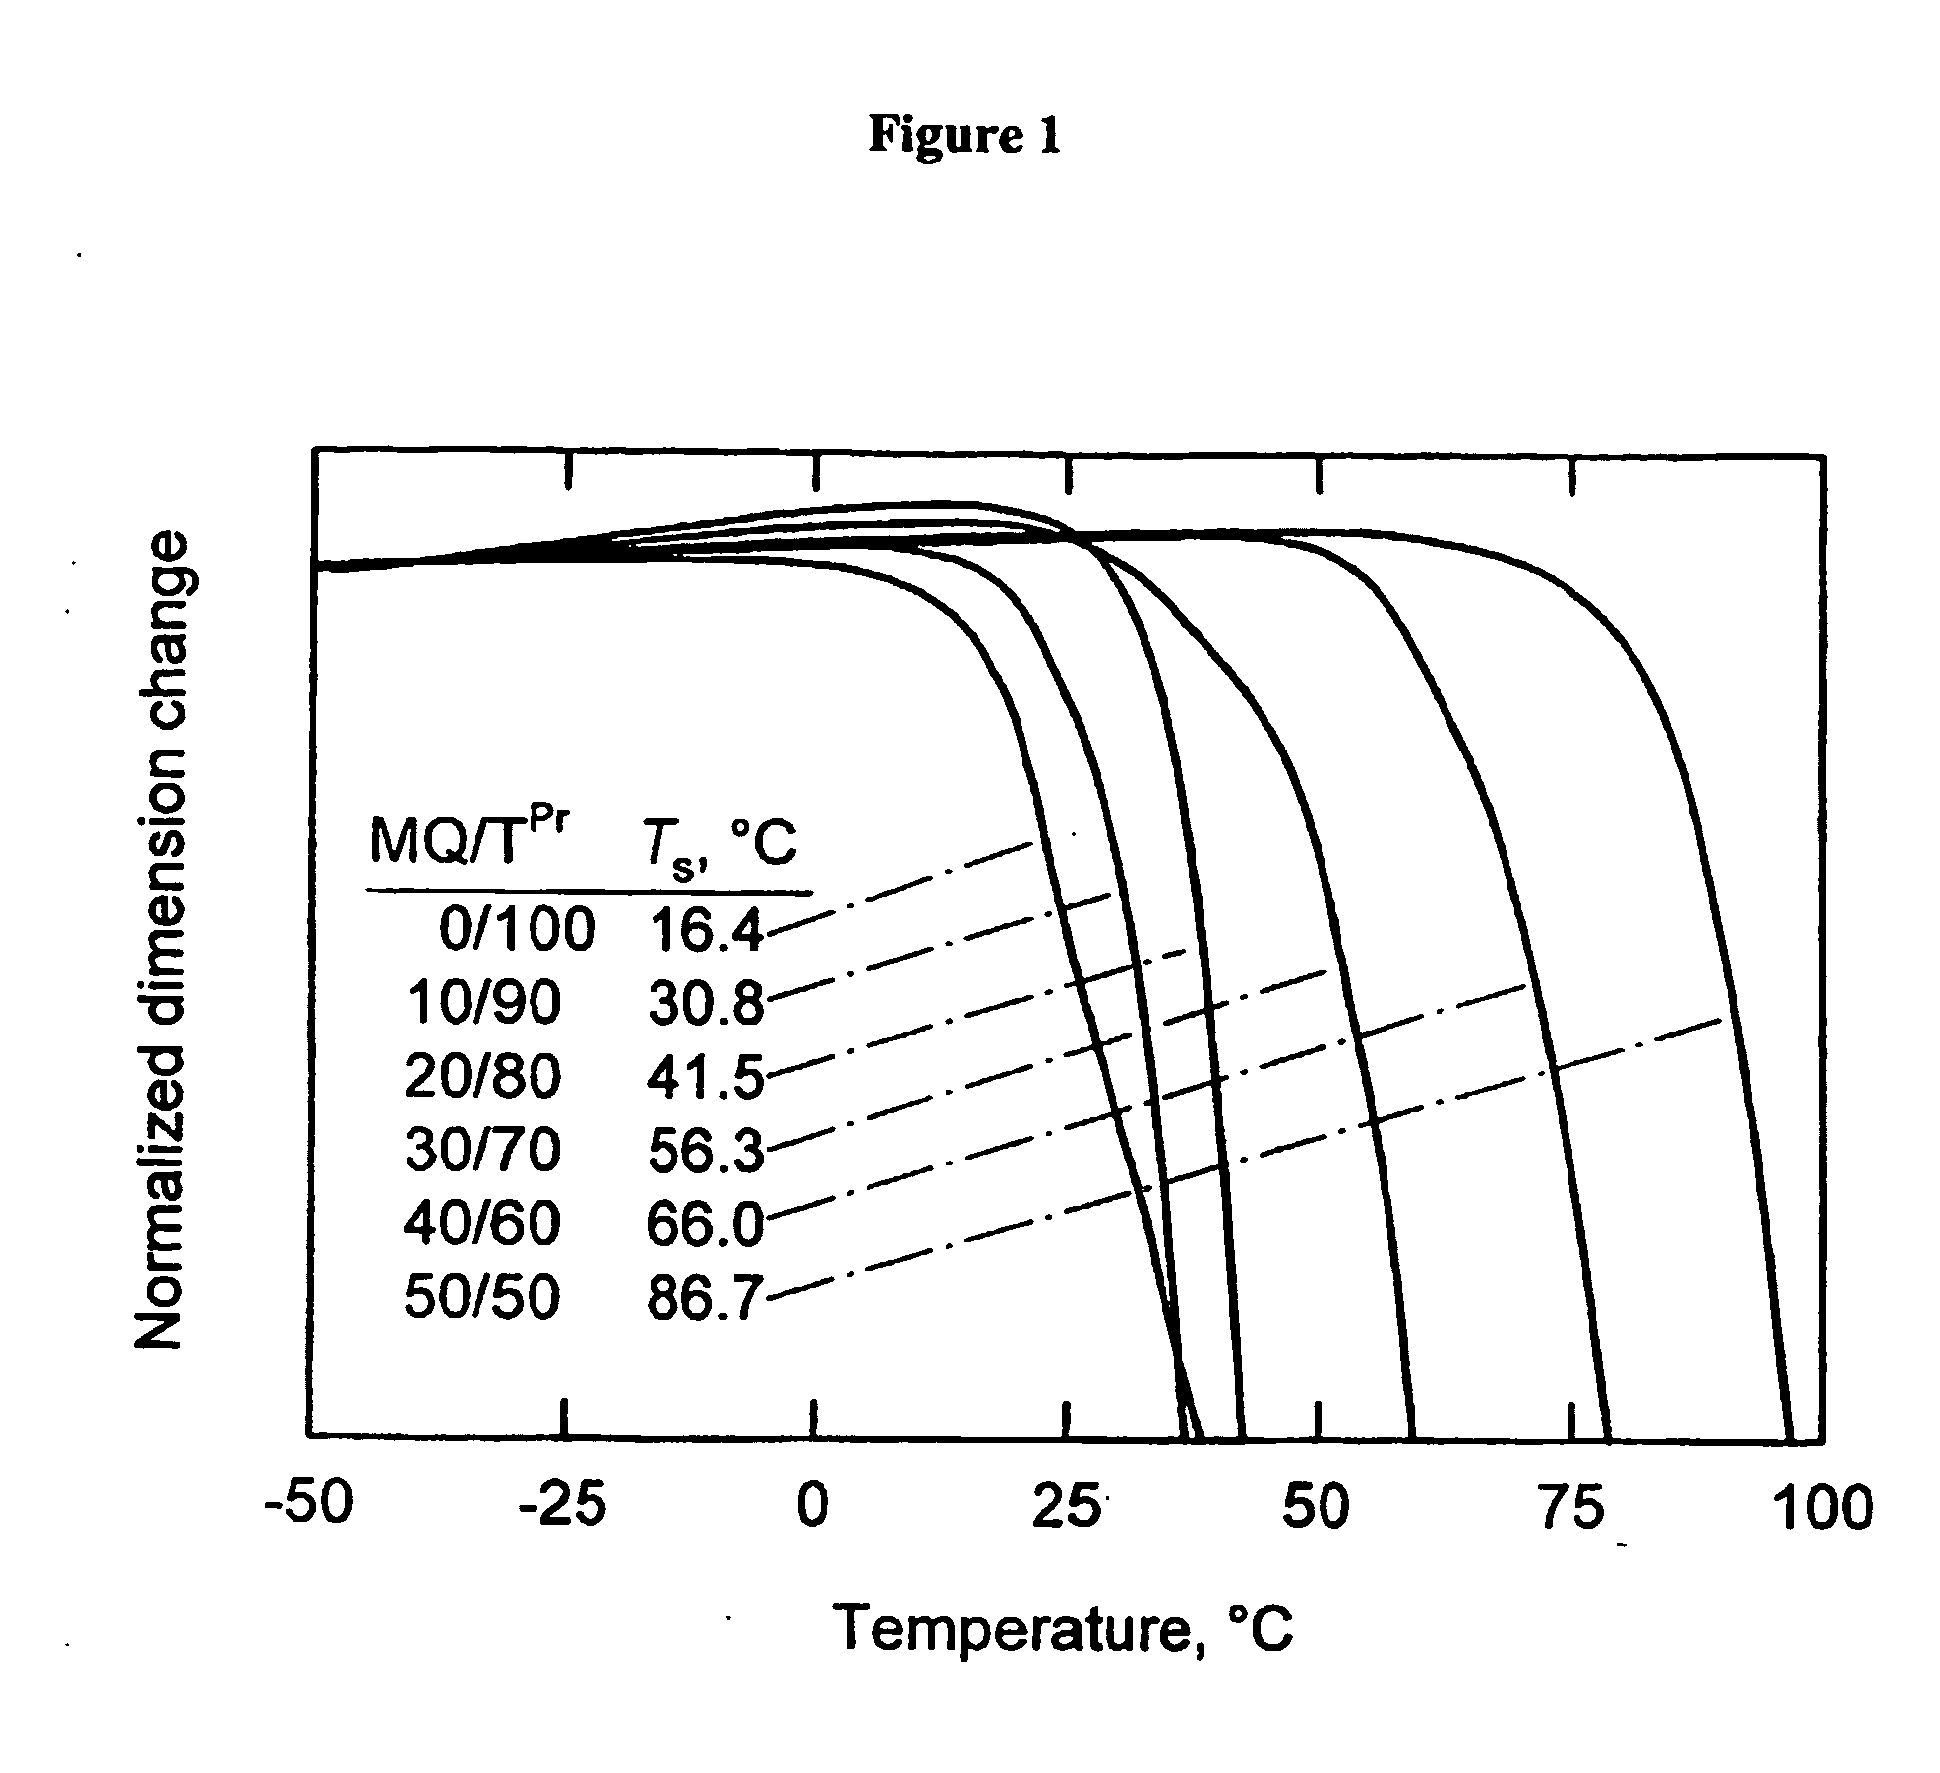 Mq and t-propyl siloxane resins compositions